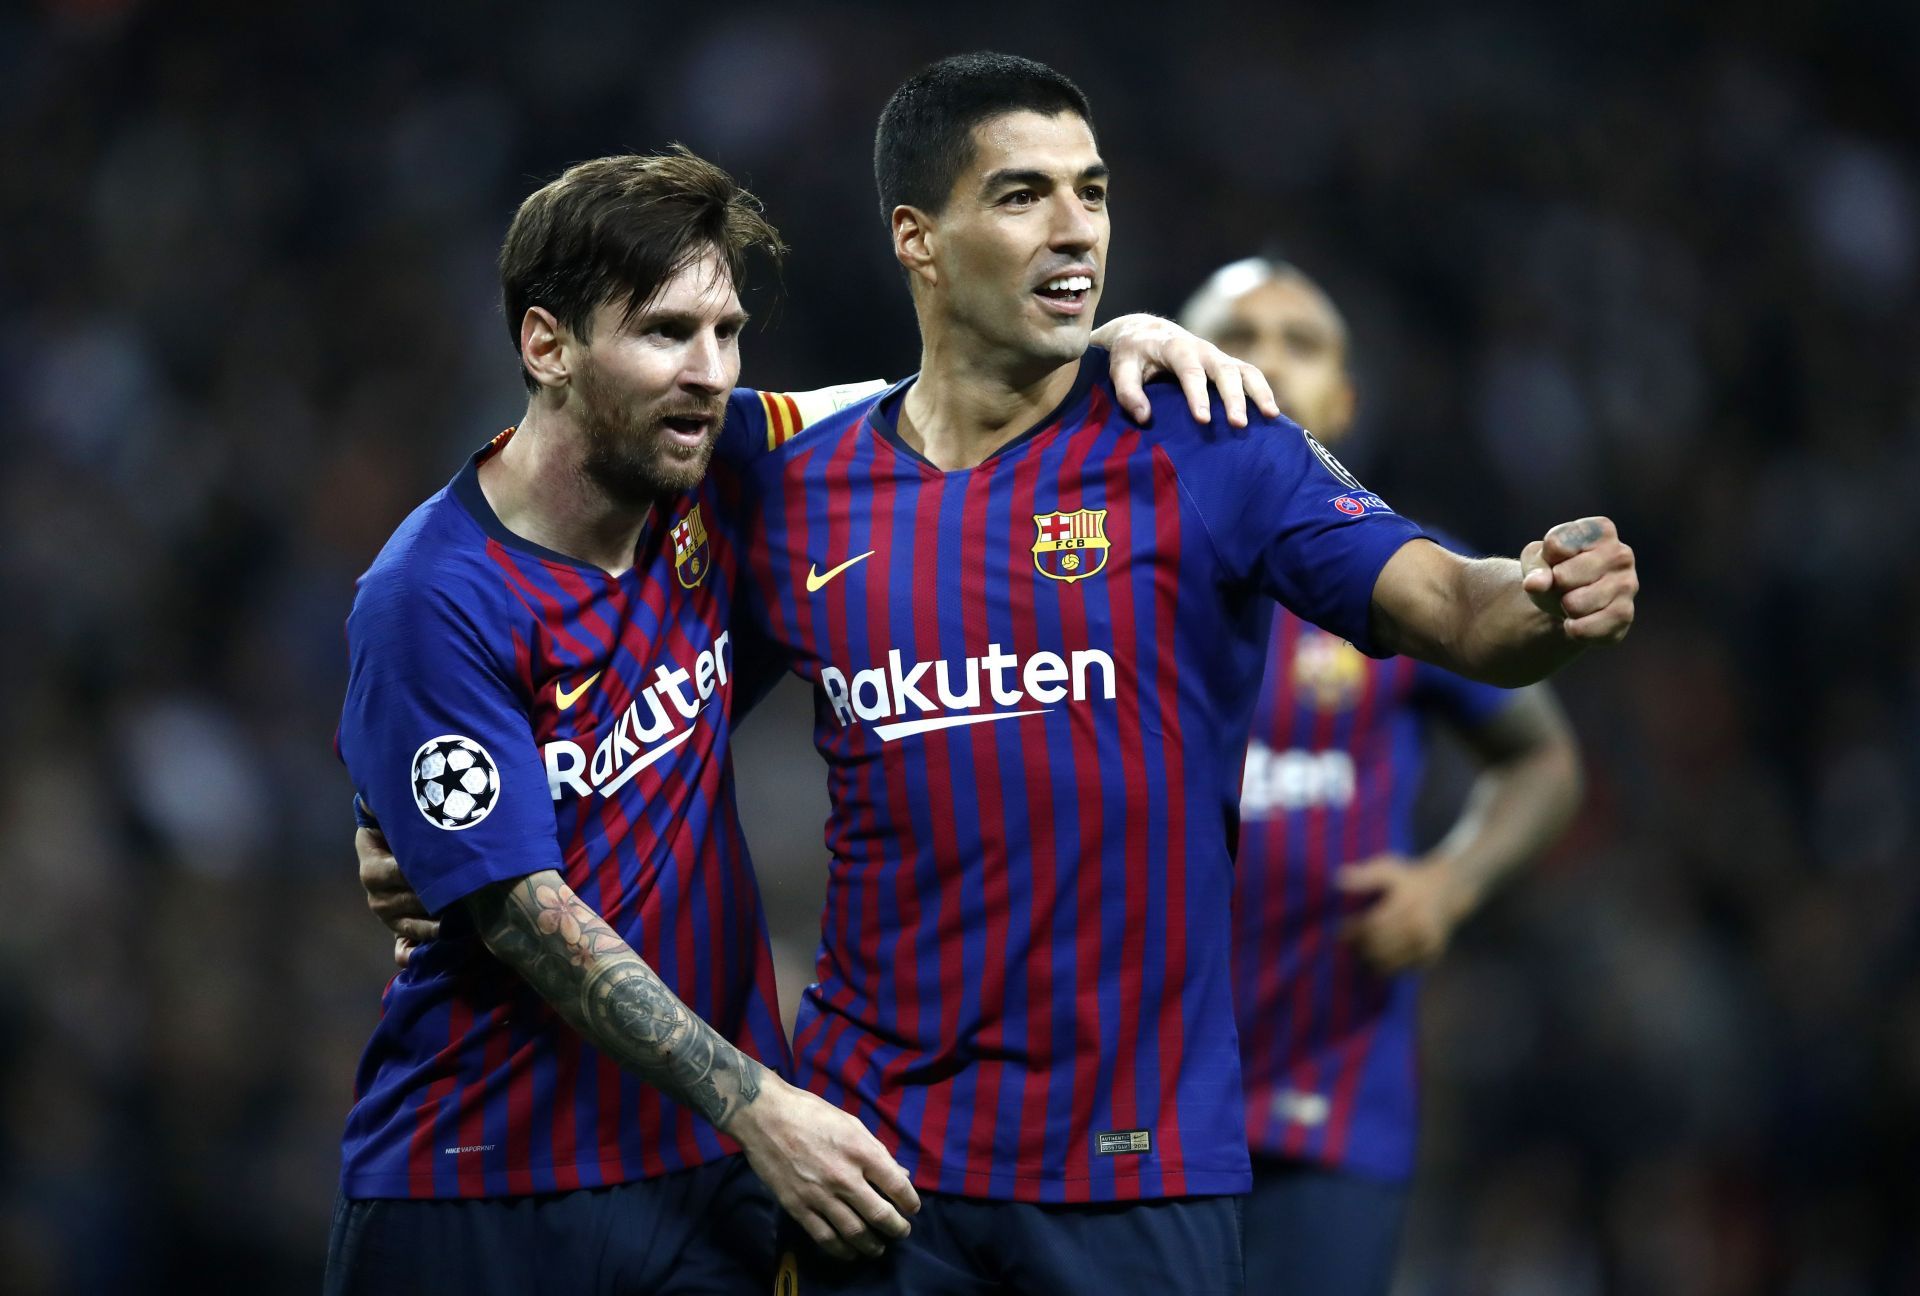 The Messi and Suarez duo is one of the deadliest in history